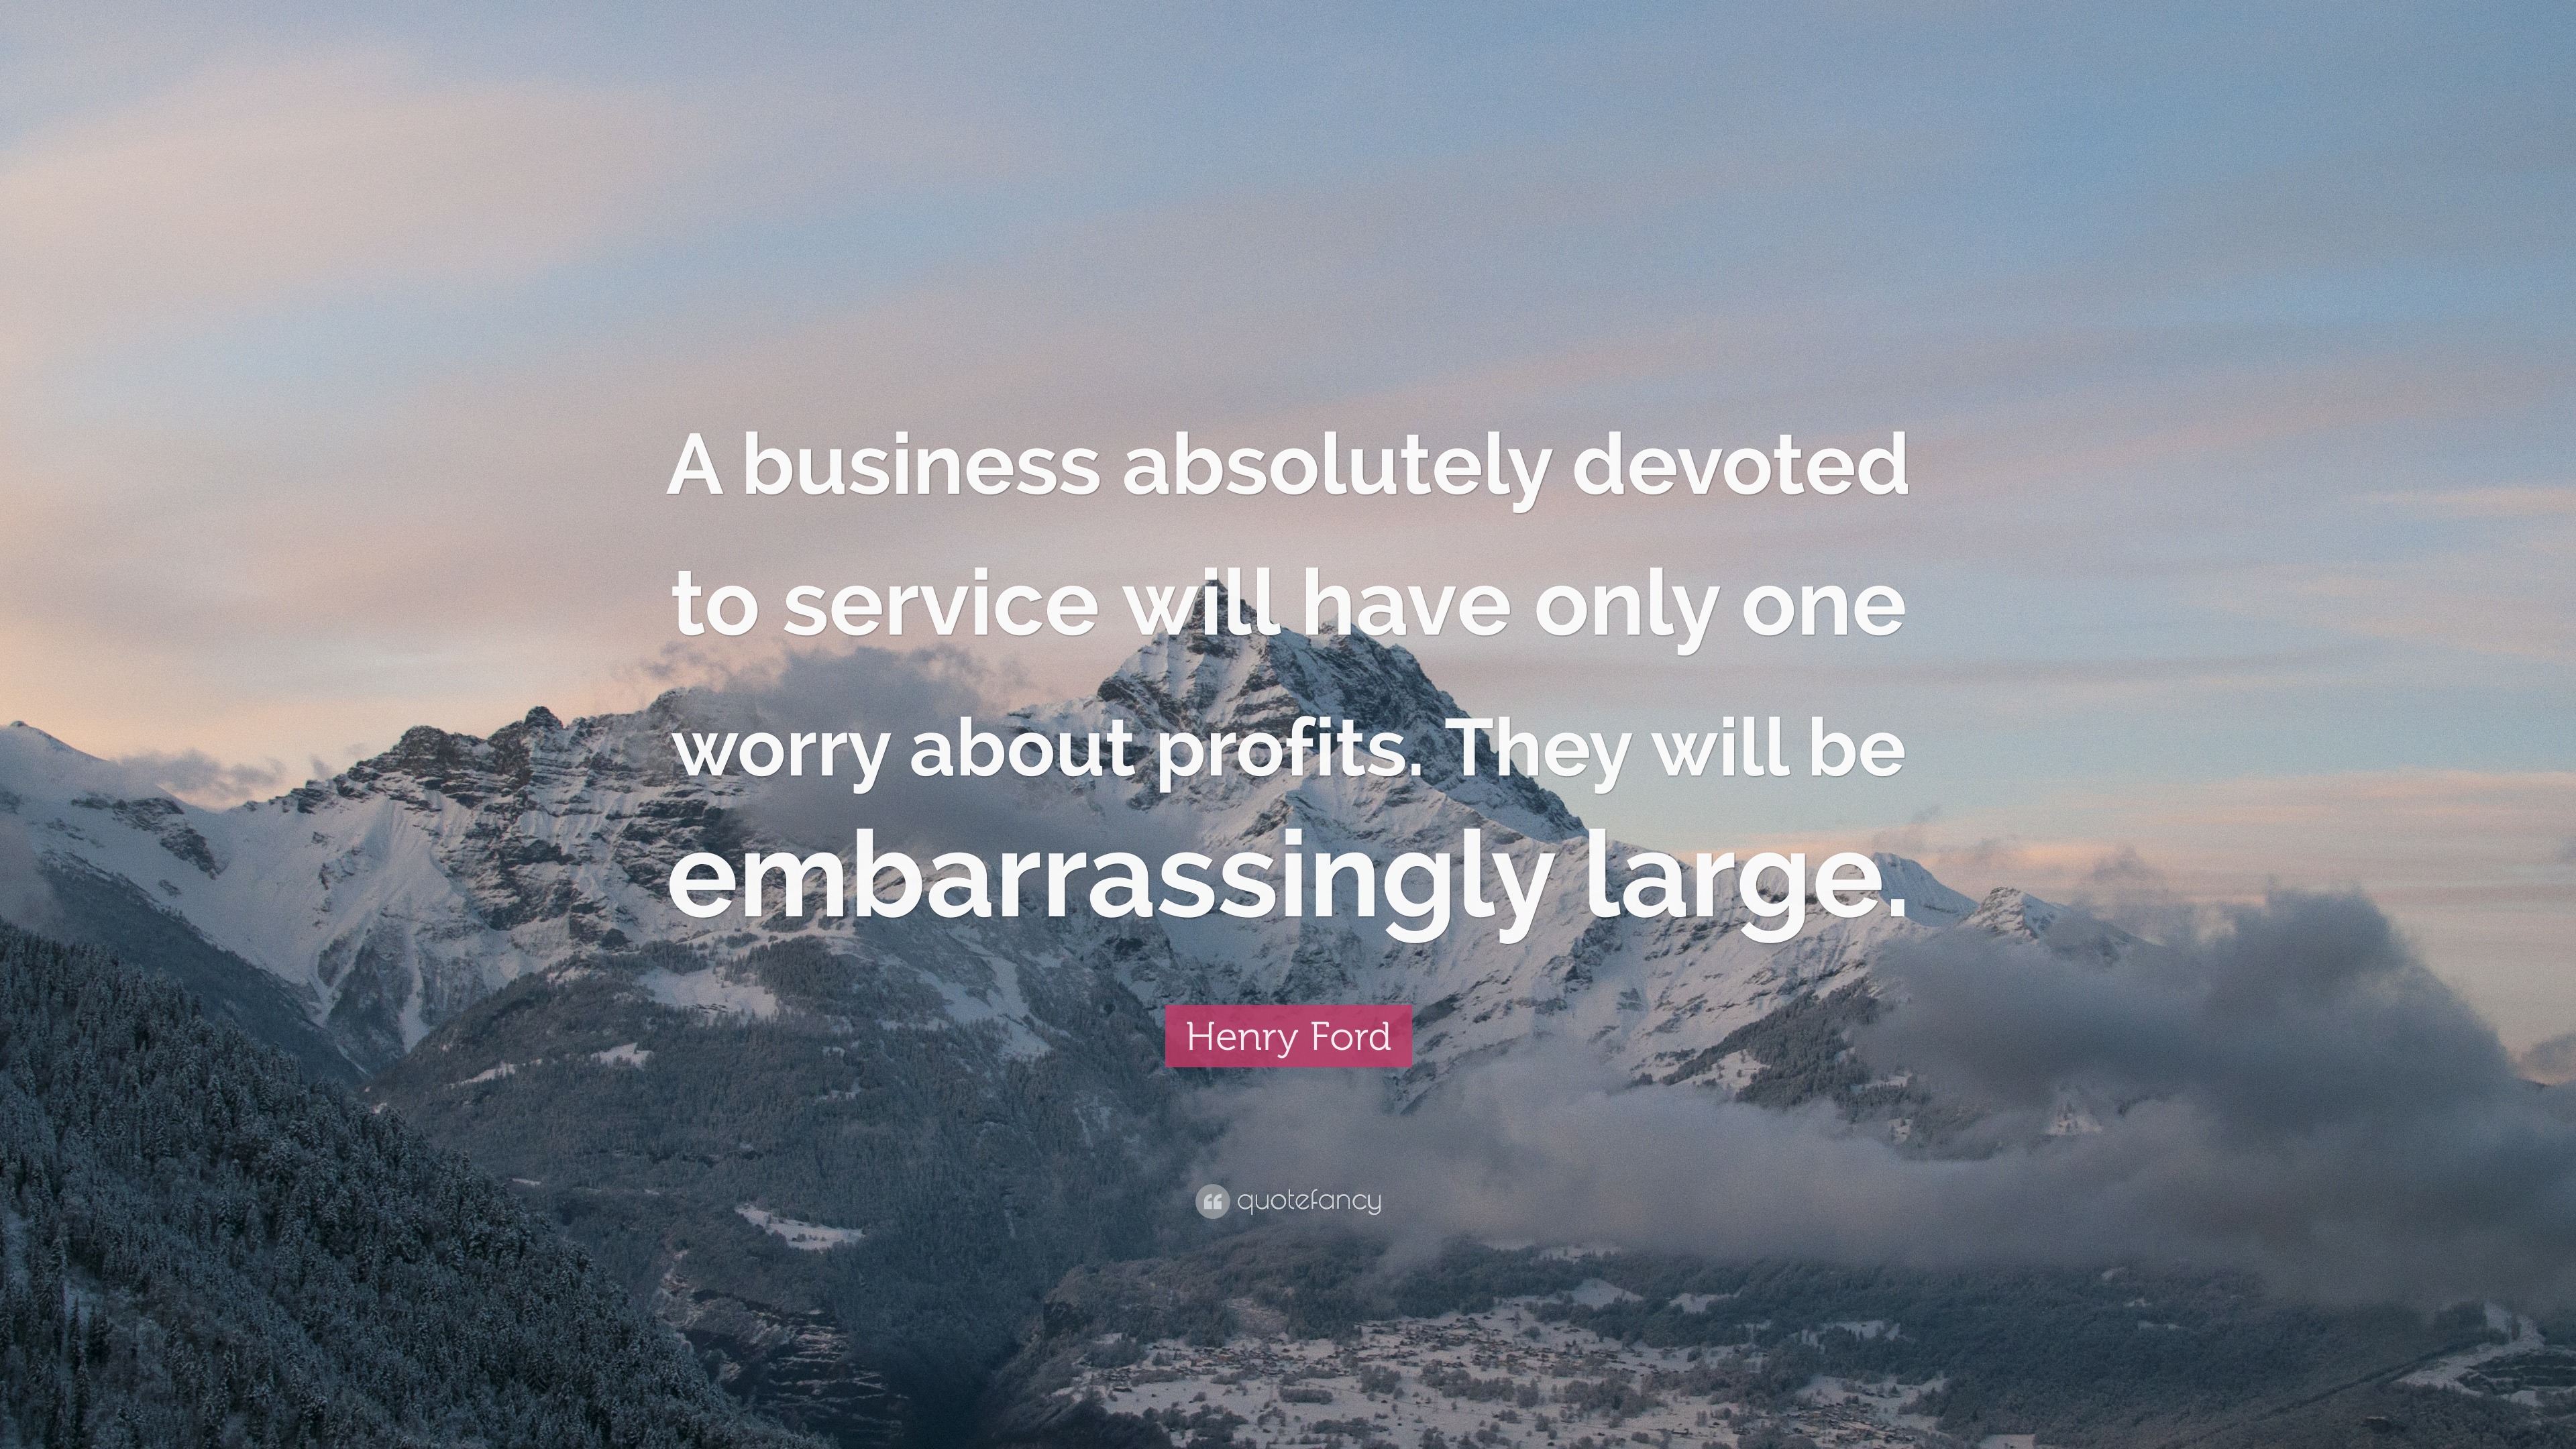 Henry Ford Quote: “A business absolutely devoted to service will have